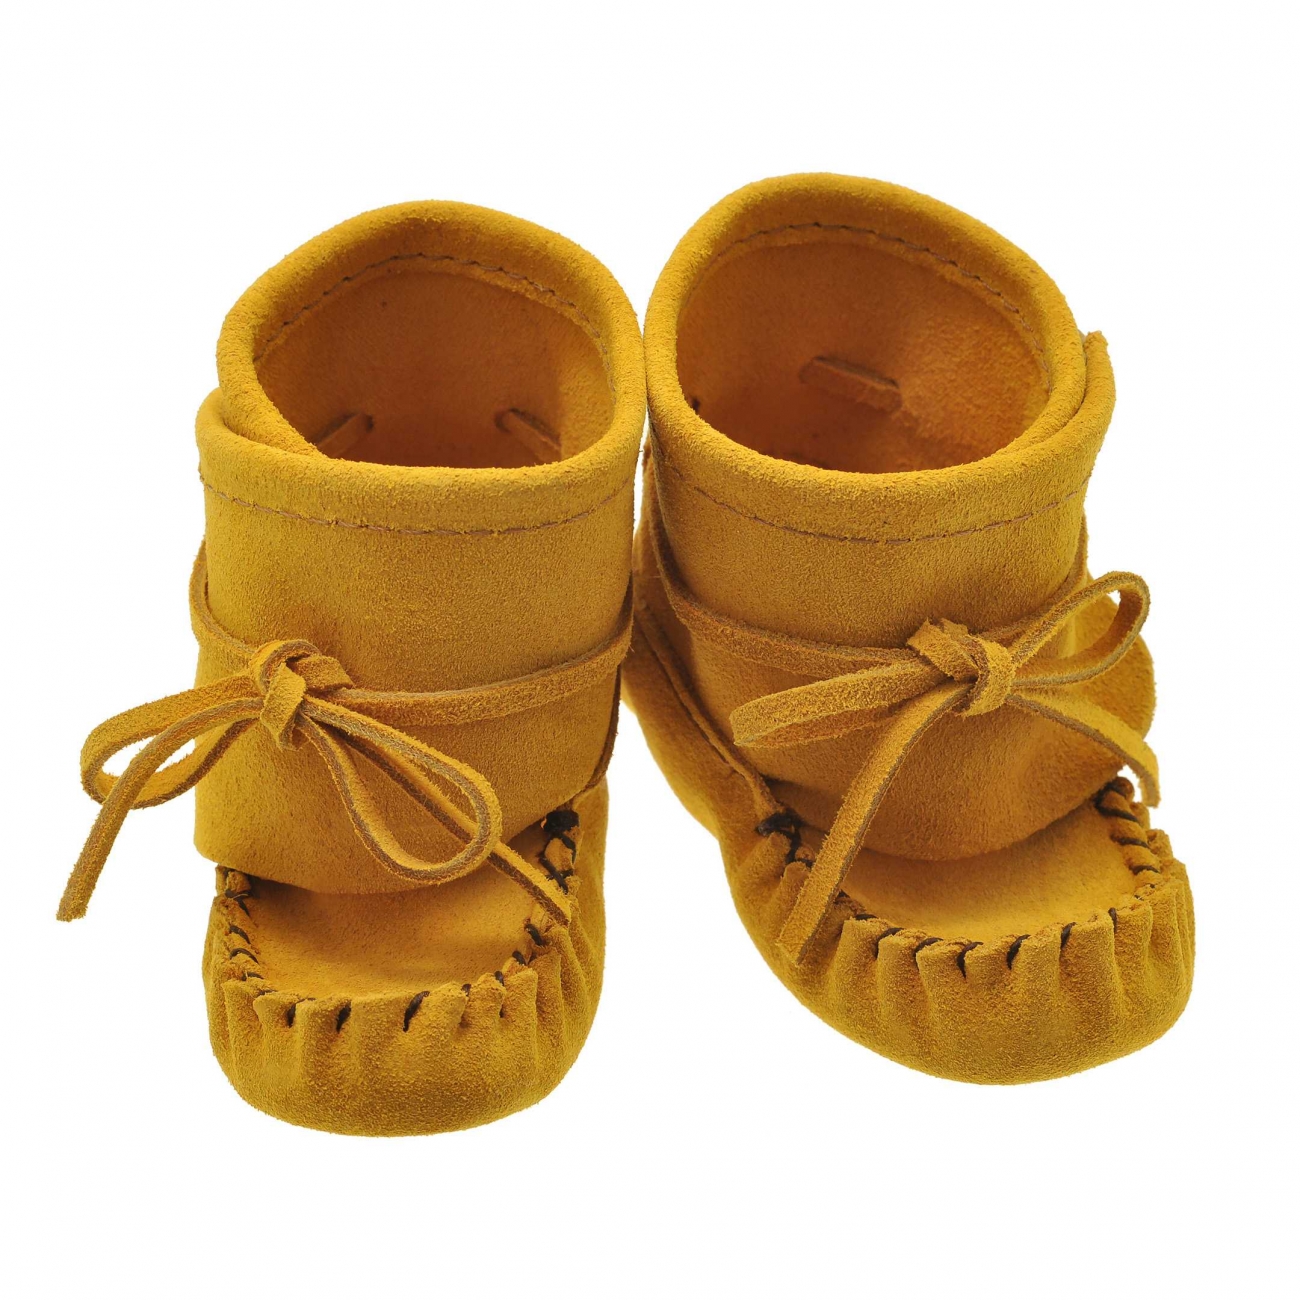 Canadian moccasins for babies M110 in leather - Harpo Paris